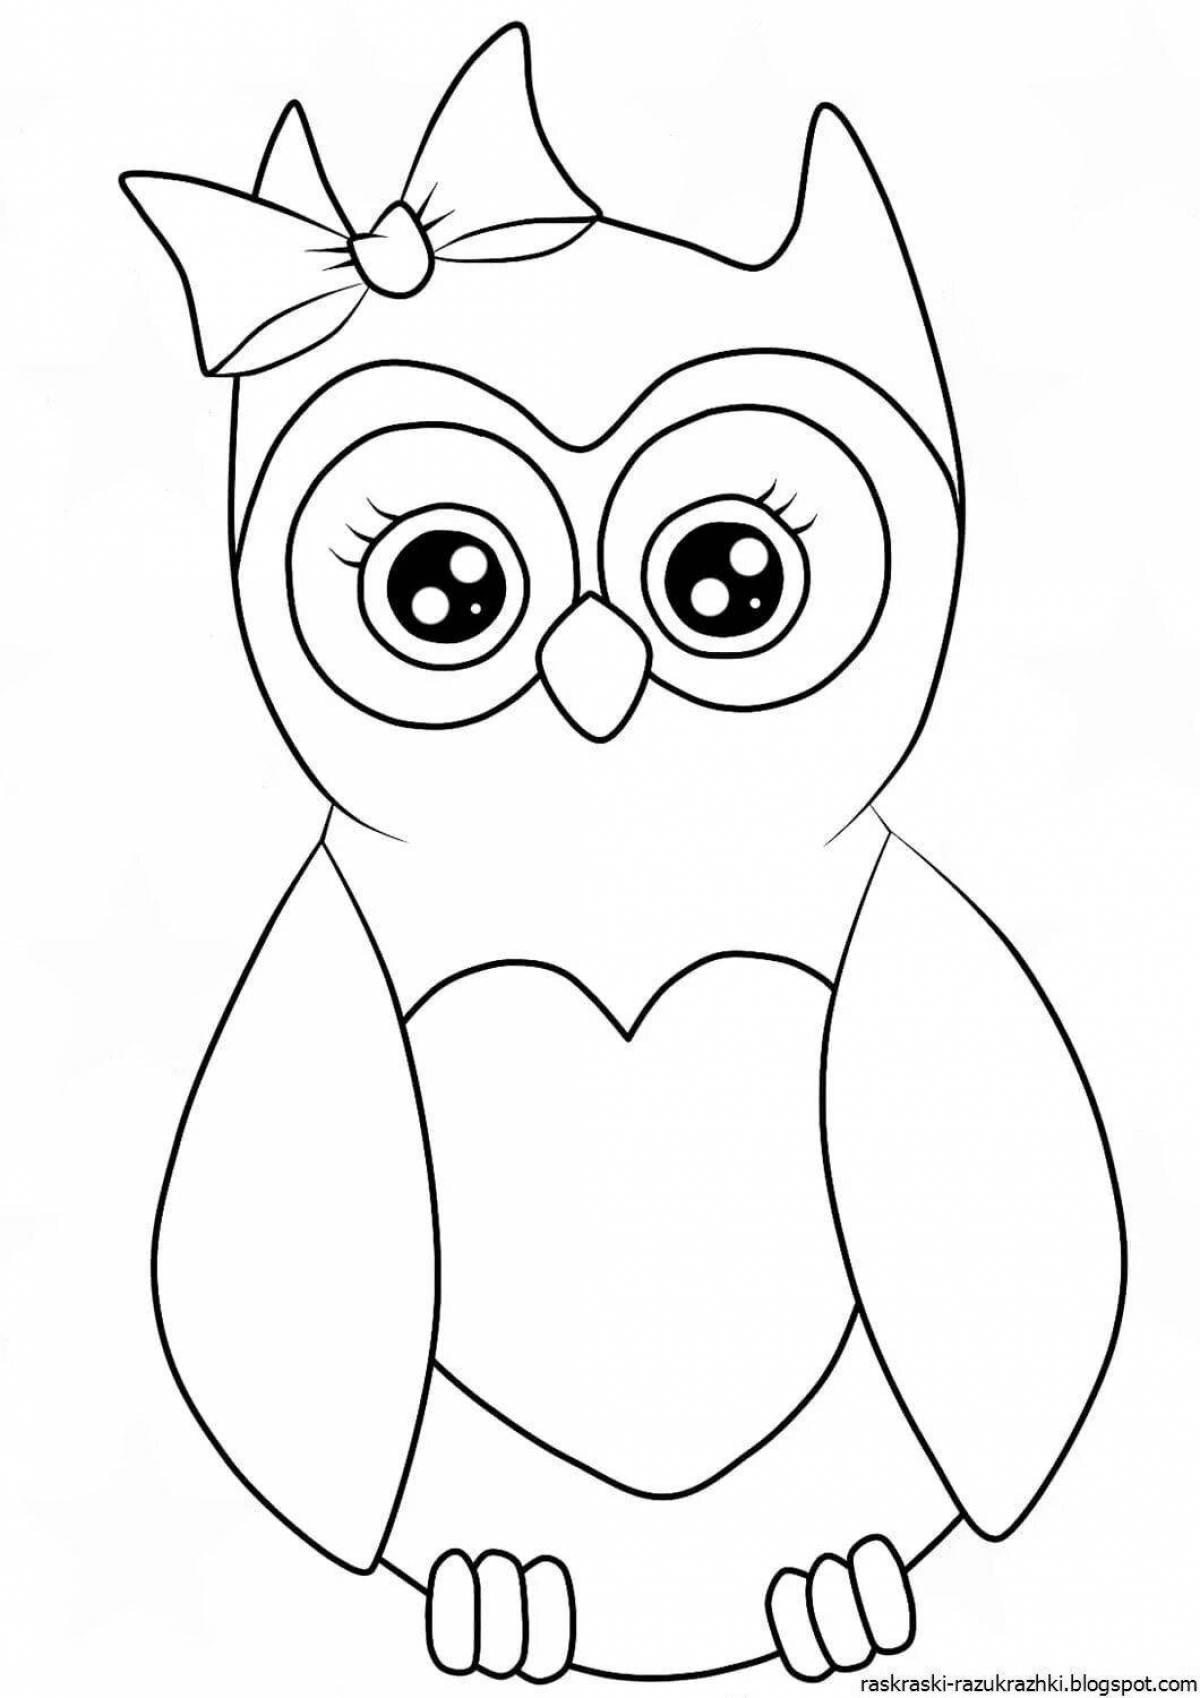 Charming owl coloring page